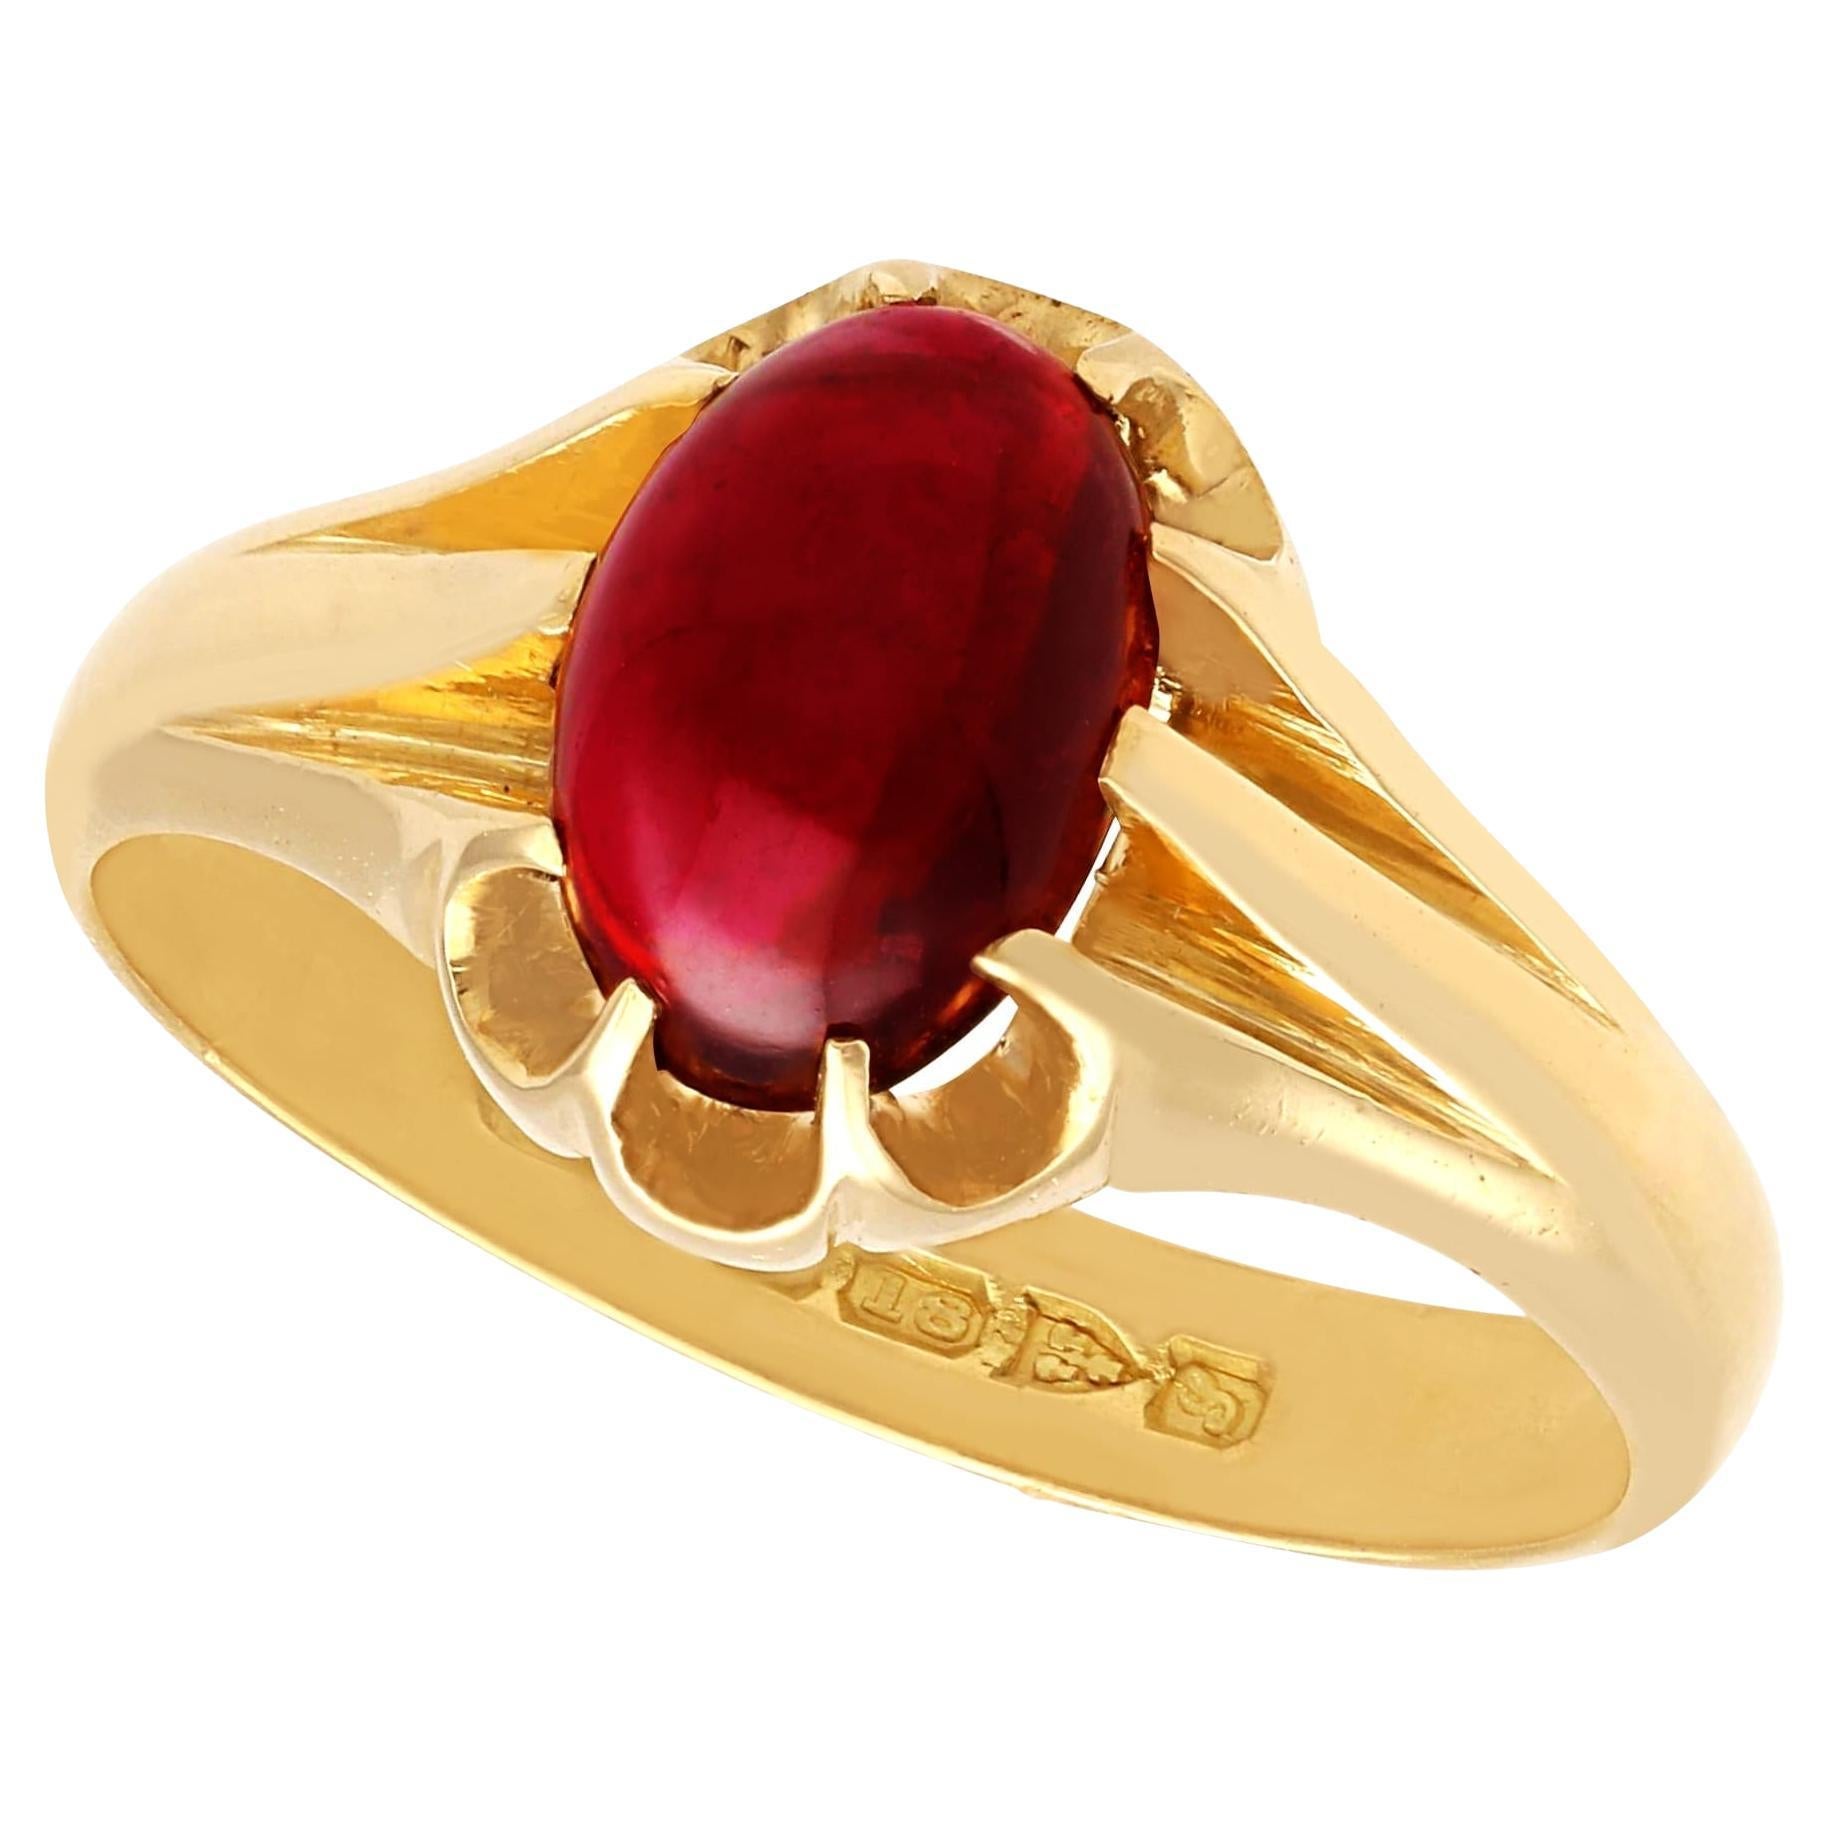 Antique 3.05 Carat Garnet and 18k Yellow Gold Dress Ring (1918) For Sale